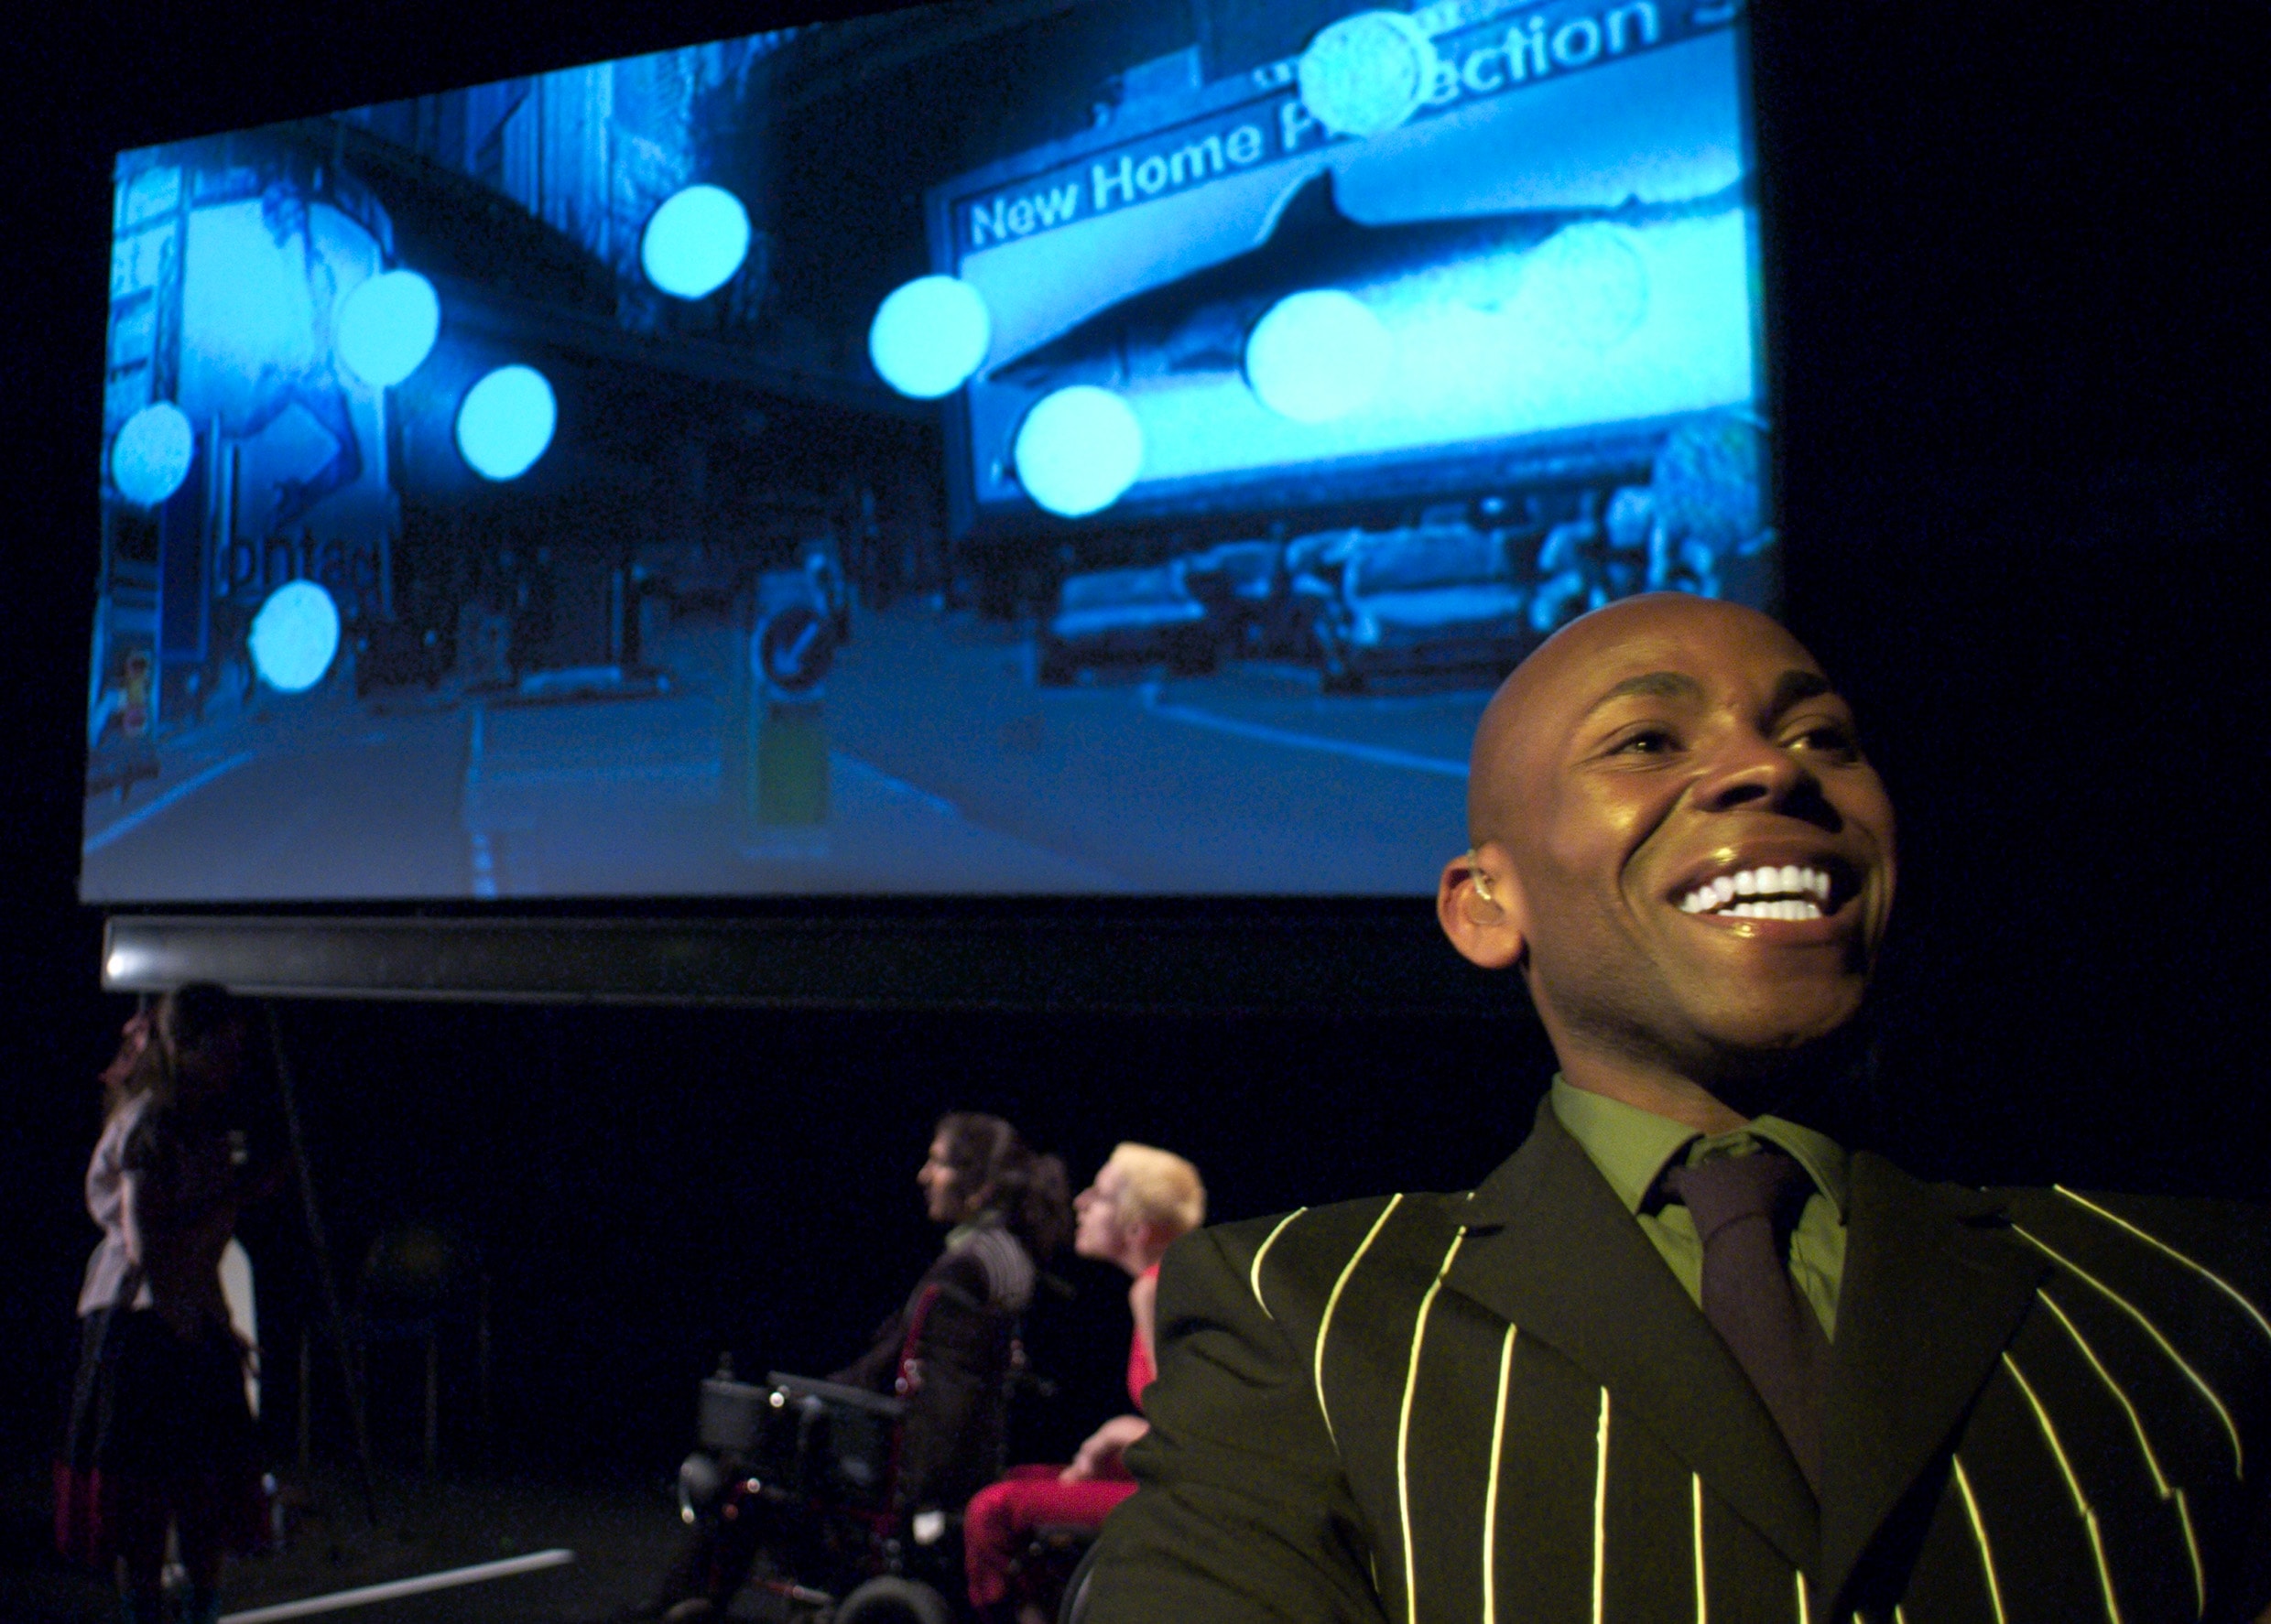 A young black man stands in front of a screen projecting the image of a typical London road. He is beaming a smile.